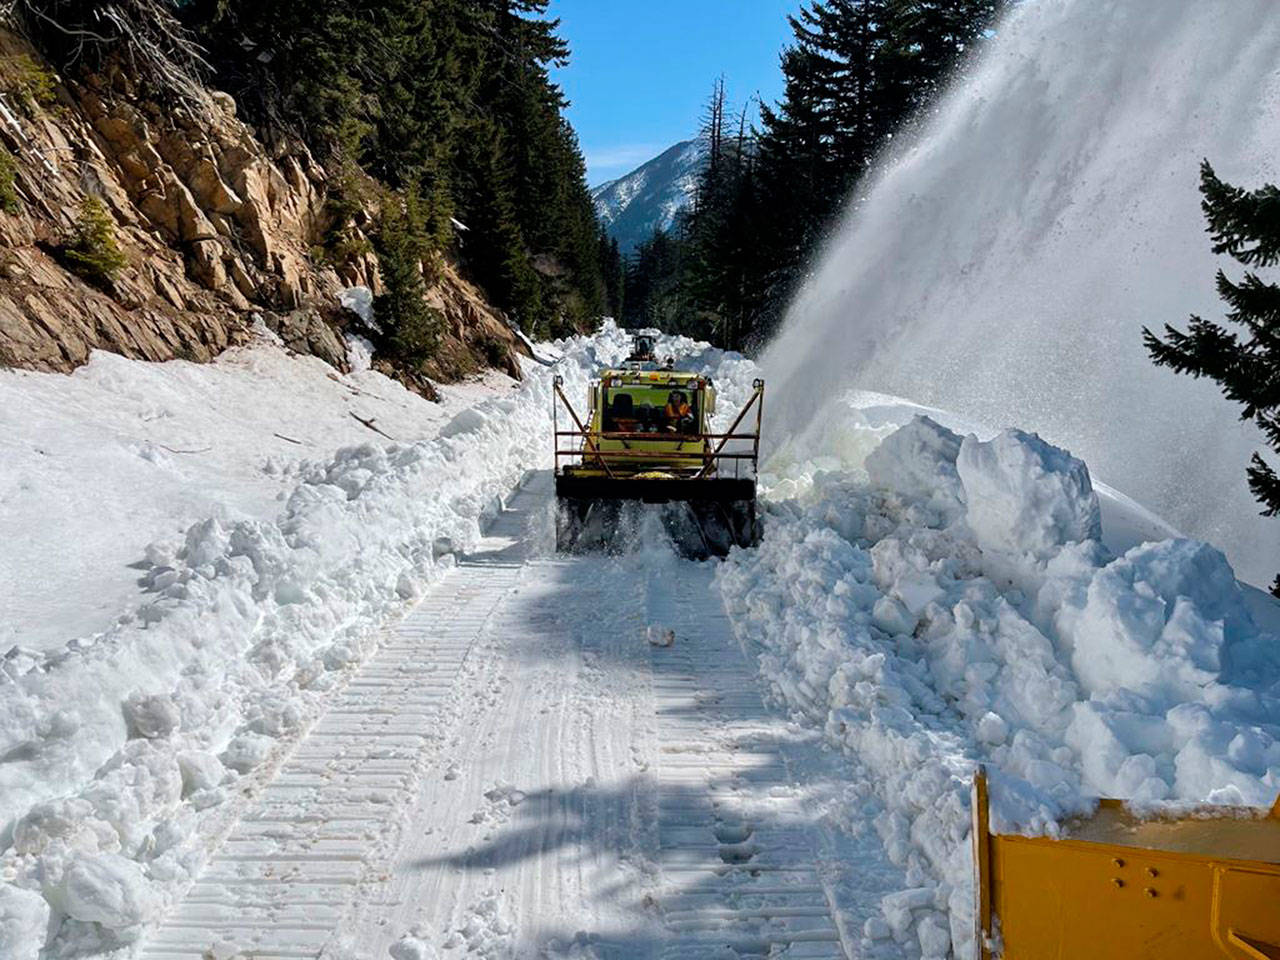 WSDOT workers clearing snow at Chinook Pass this year. Photo by Washington State Department of Transportation